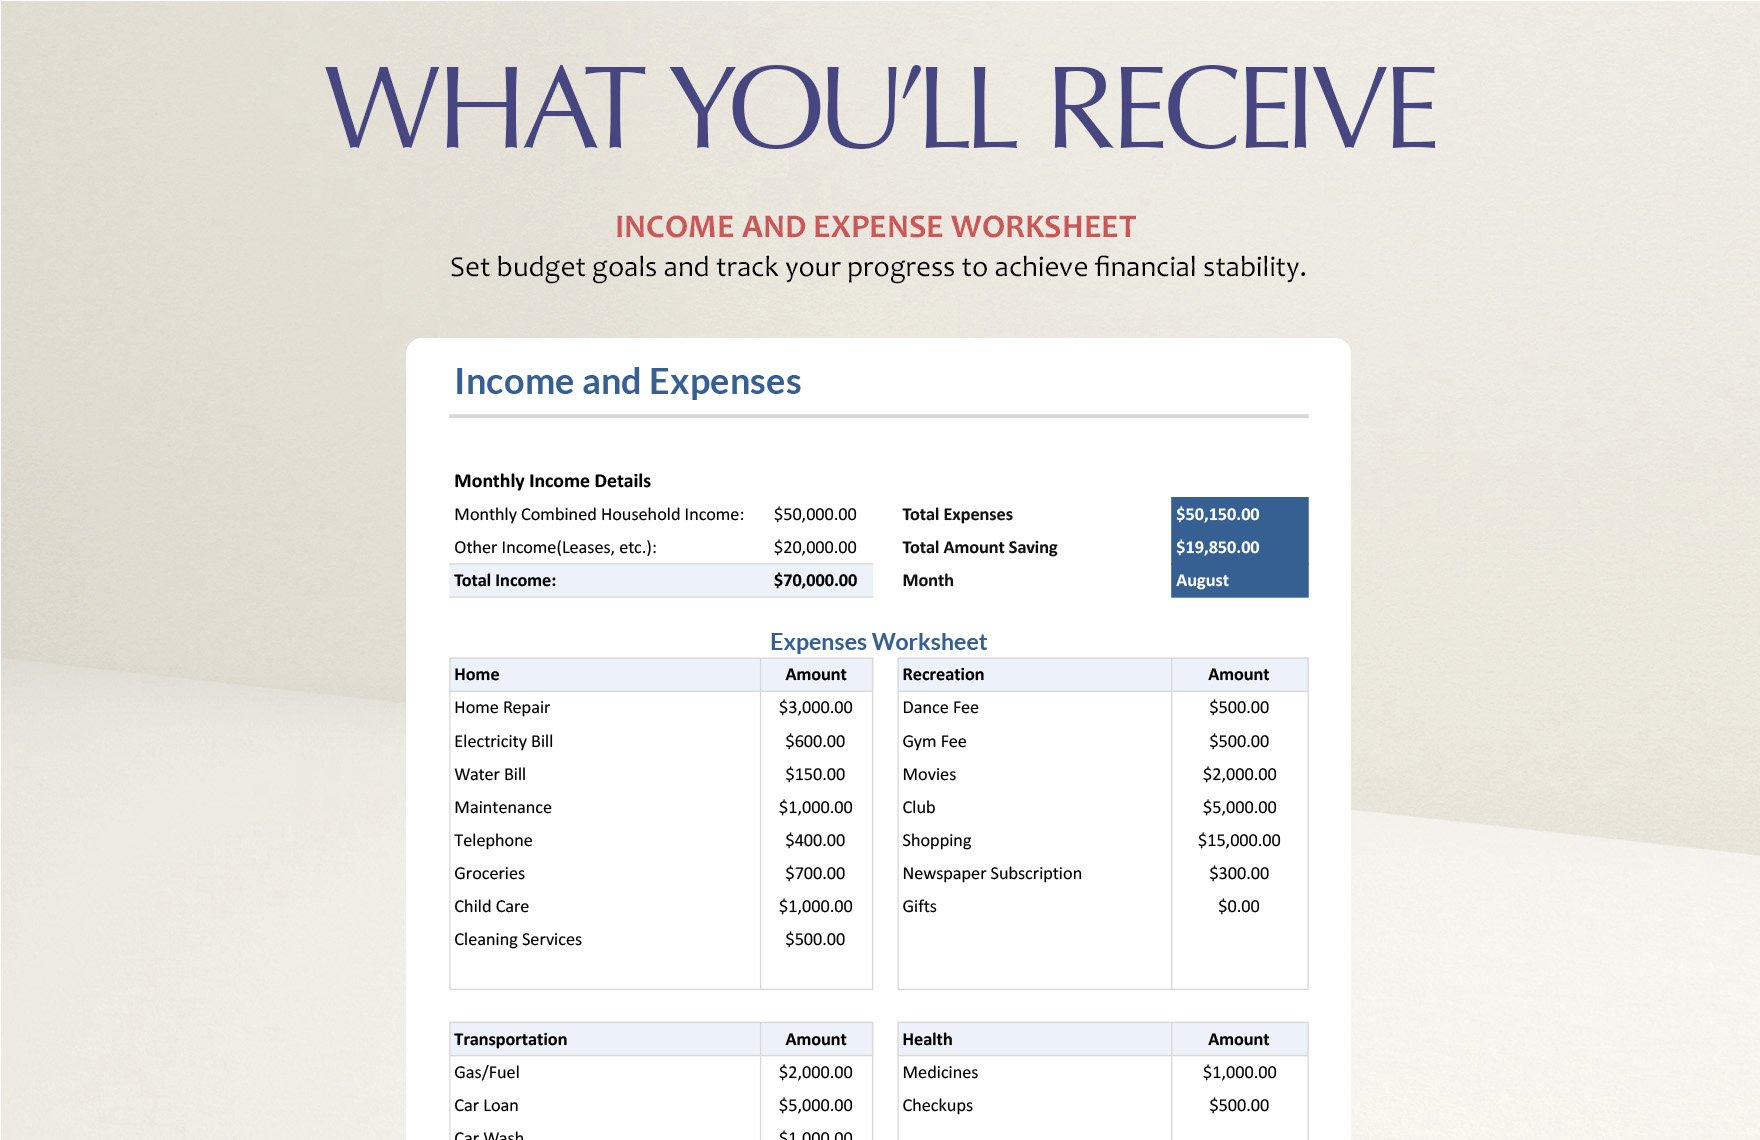 Income and Expense Worksheet Instructions